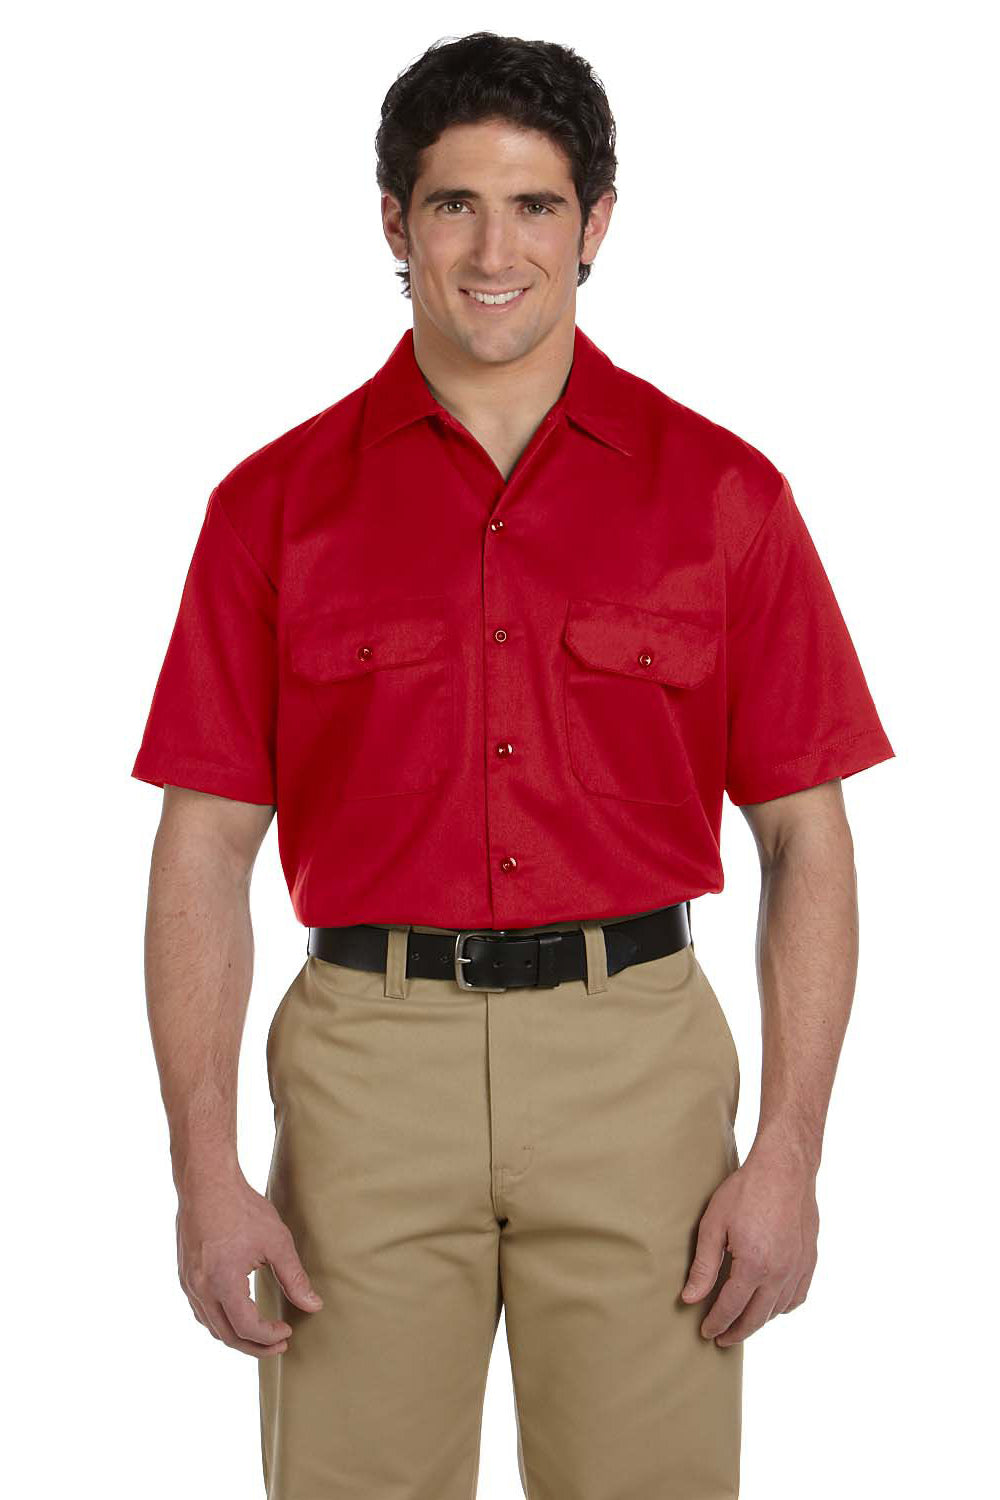 Dickies 1574 Mens Moisture Wicking Short Sleeve Button Down Shirt w/ Double Pockets Red Front